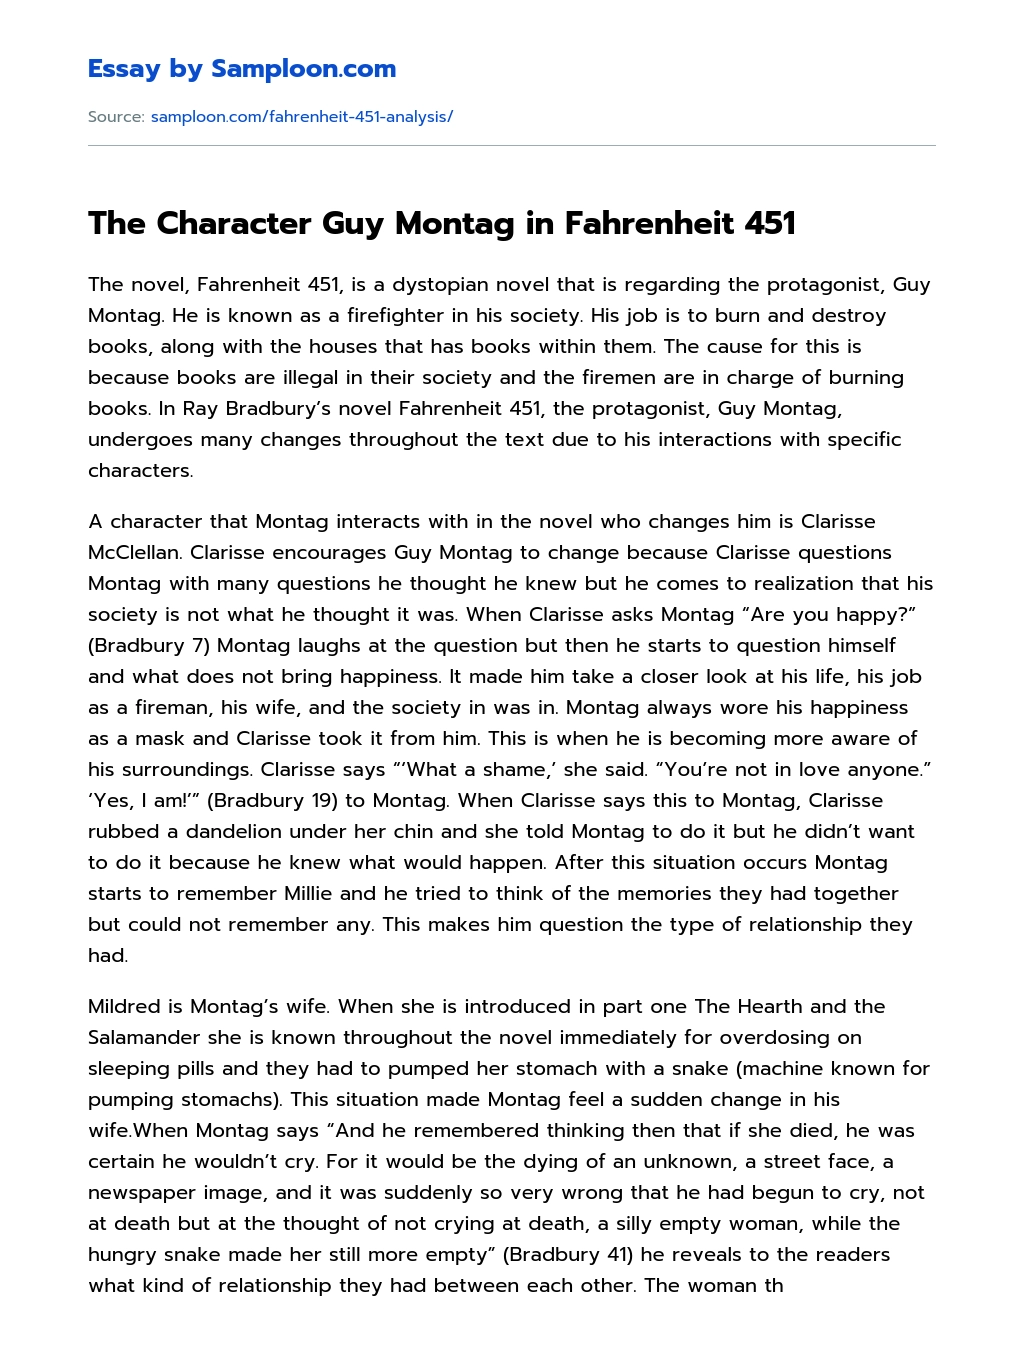 The Character Guy Montag in Fahrenheit 451 Literary Analysis essay